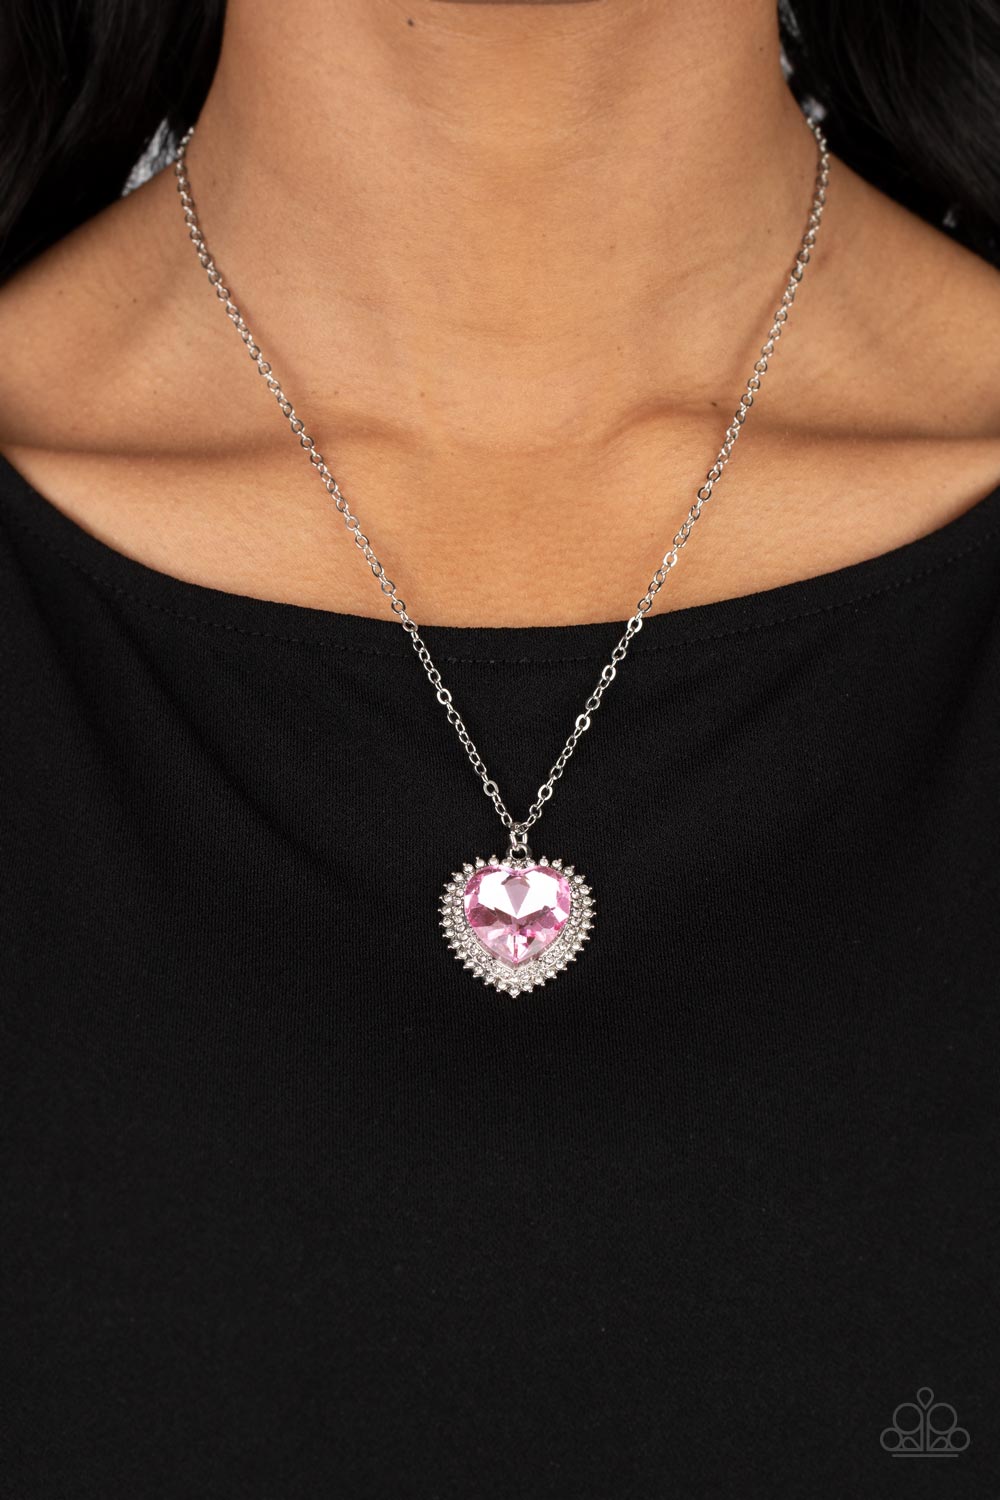 silver, silver jewlery, necklace, medium necklace, pink, pink jewelry, affrodable jewlery, affordable holiday gift, heart, heart jewelry, casual jewlery, valentines day gift, jewelry stores, jewelry stores near me, paparazzi accessories, 